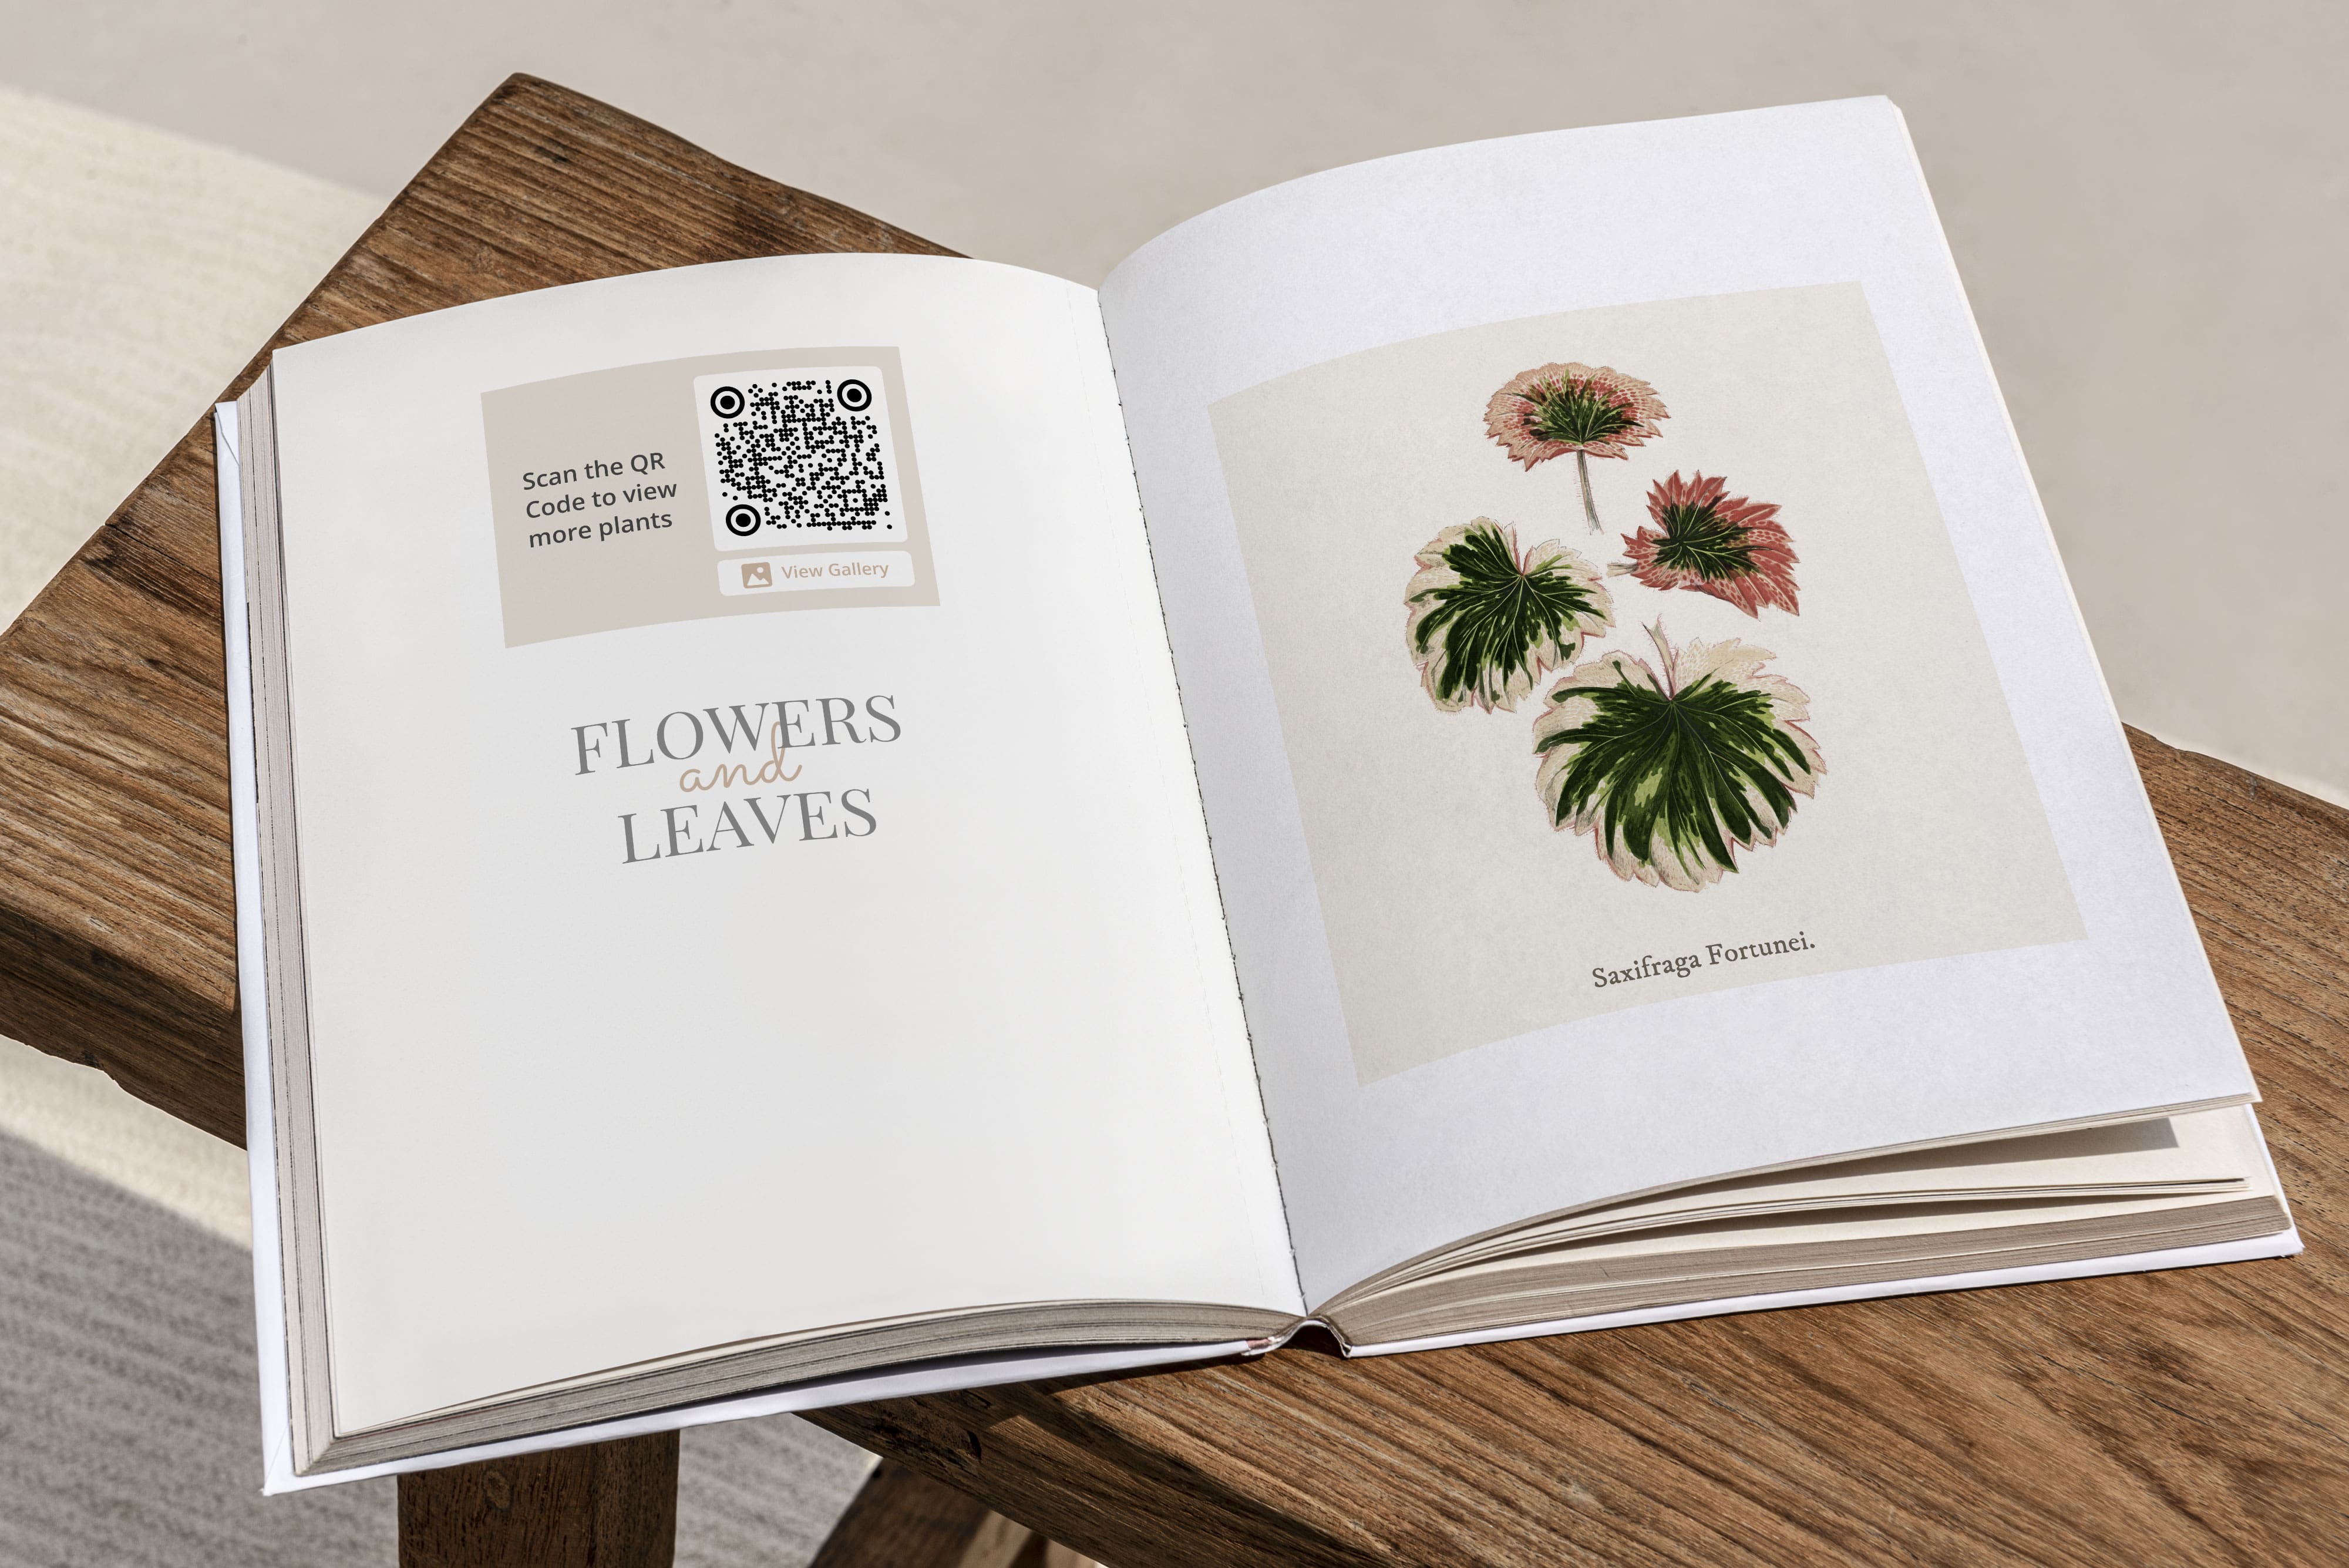 Books Enhanced with Interactive QR Codes